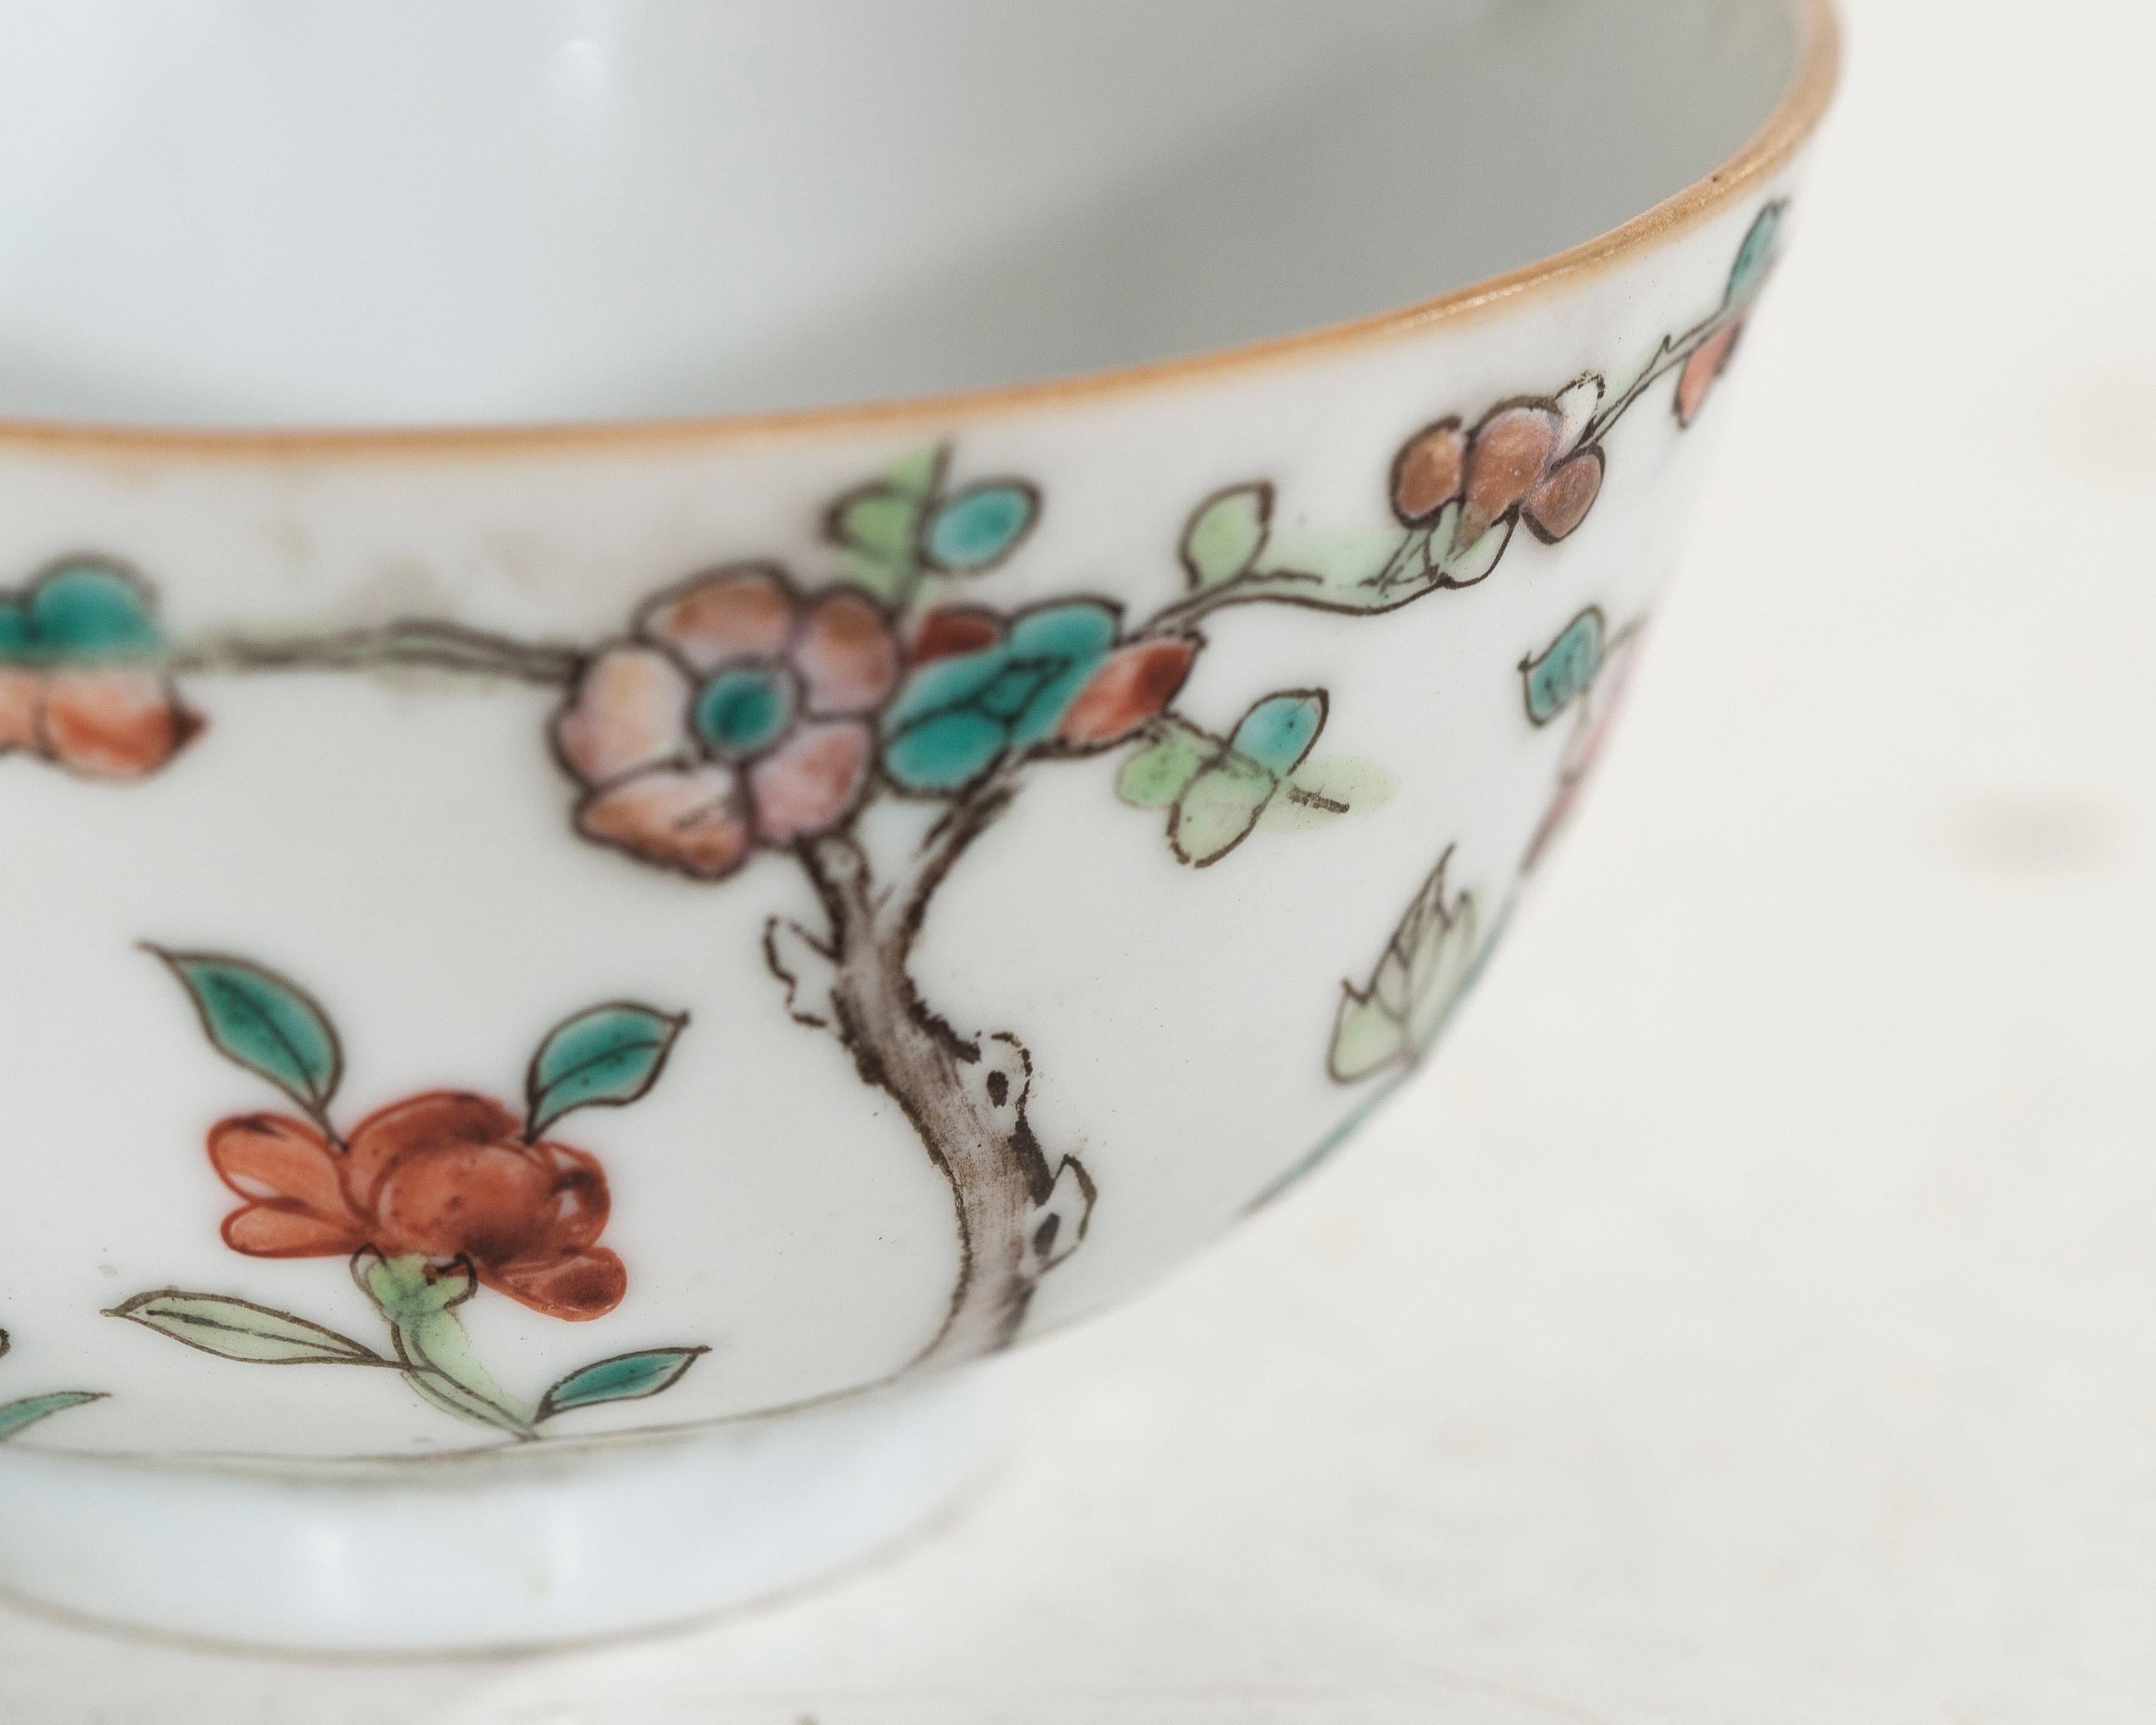 Porcelain Chinese bowl with painted decorations, 18th C. For Sale